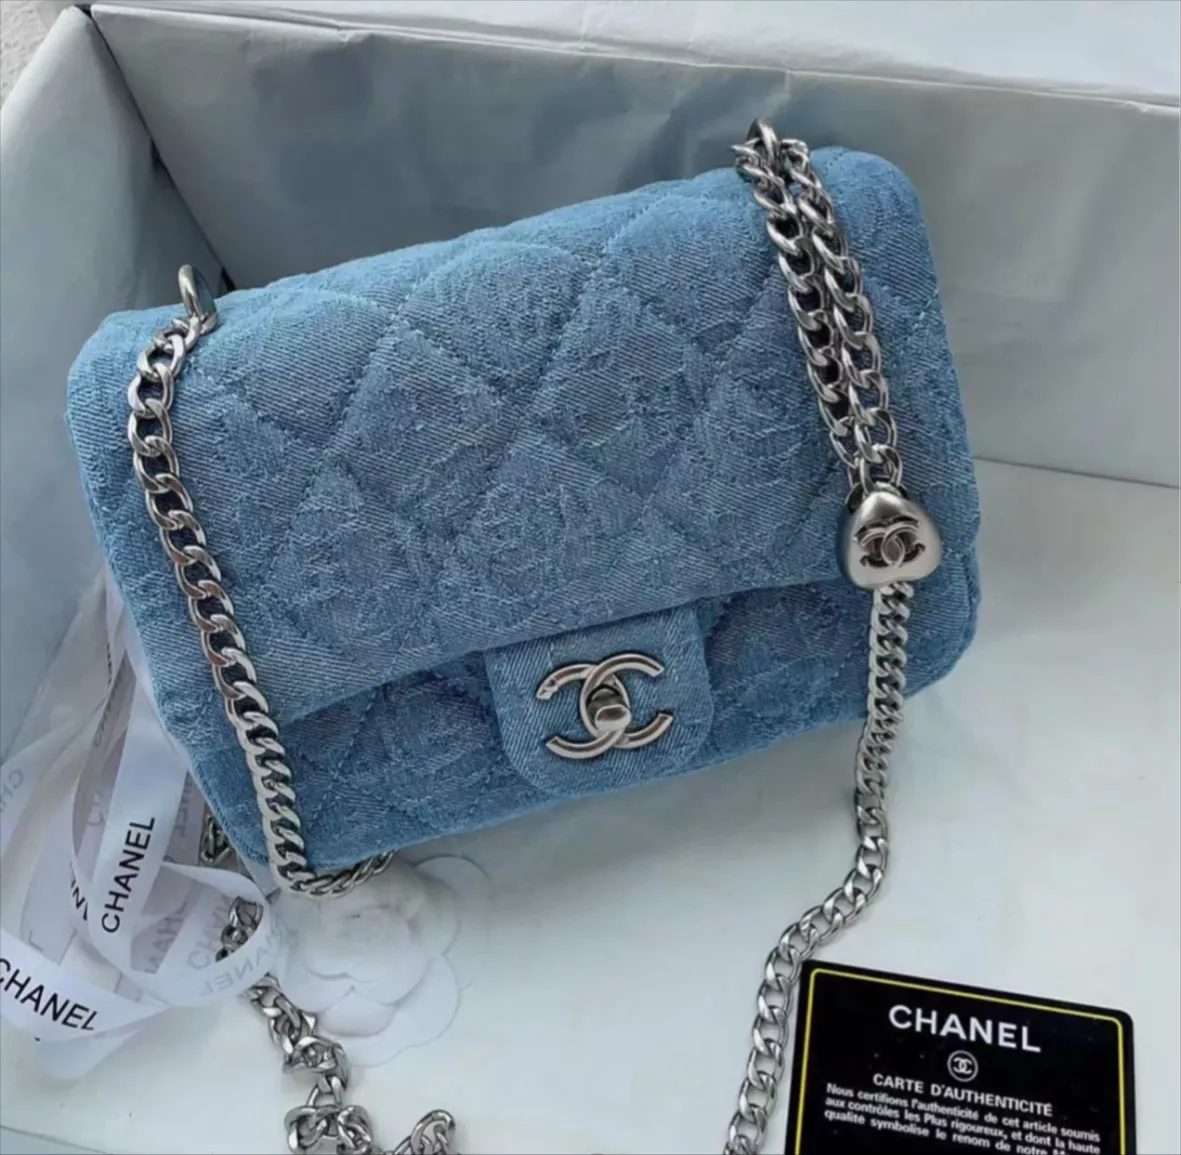 DUPES DESIGNER BAGS / CHANEL NAKED CLEAR BAG / CLEAR